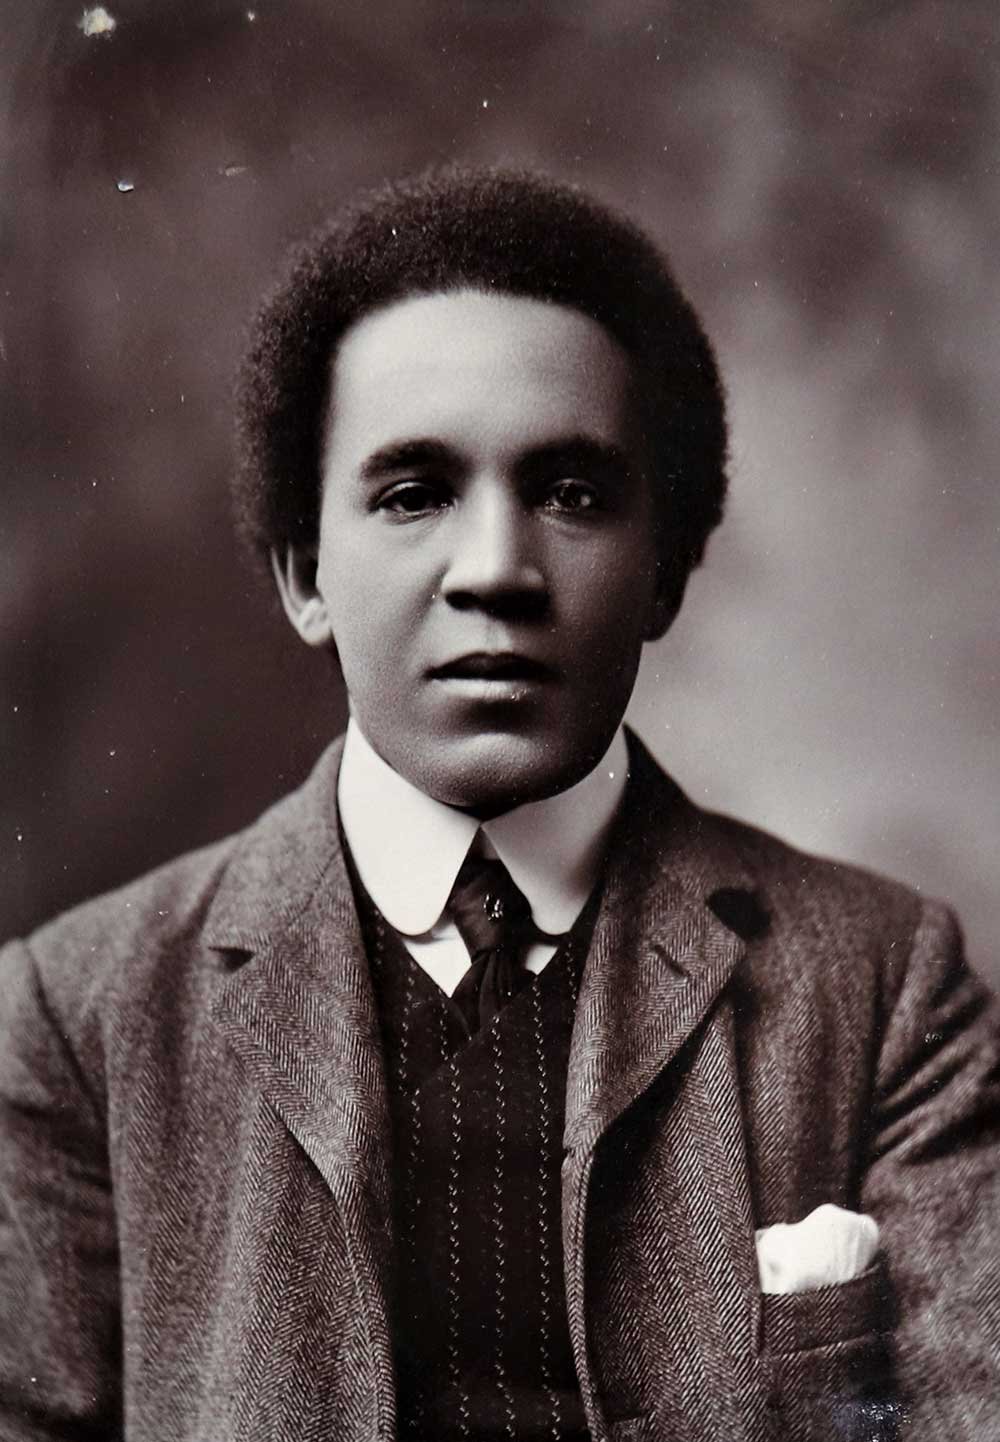 A head and shoulders shot of Coleridge-Taylor. He is face-on to the camera, wearing a smart suit.